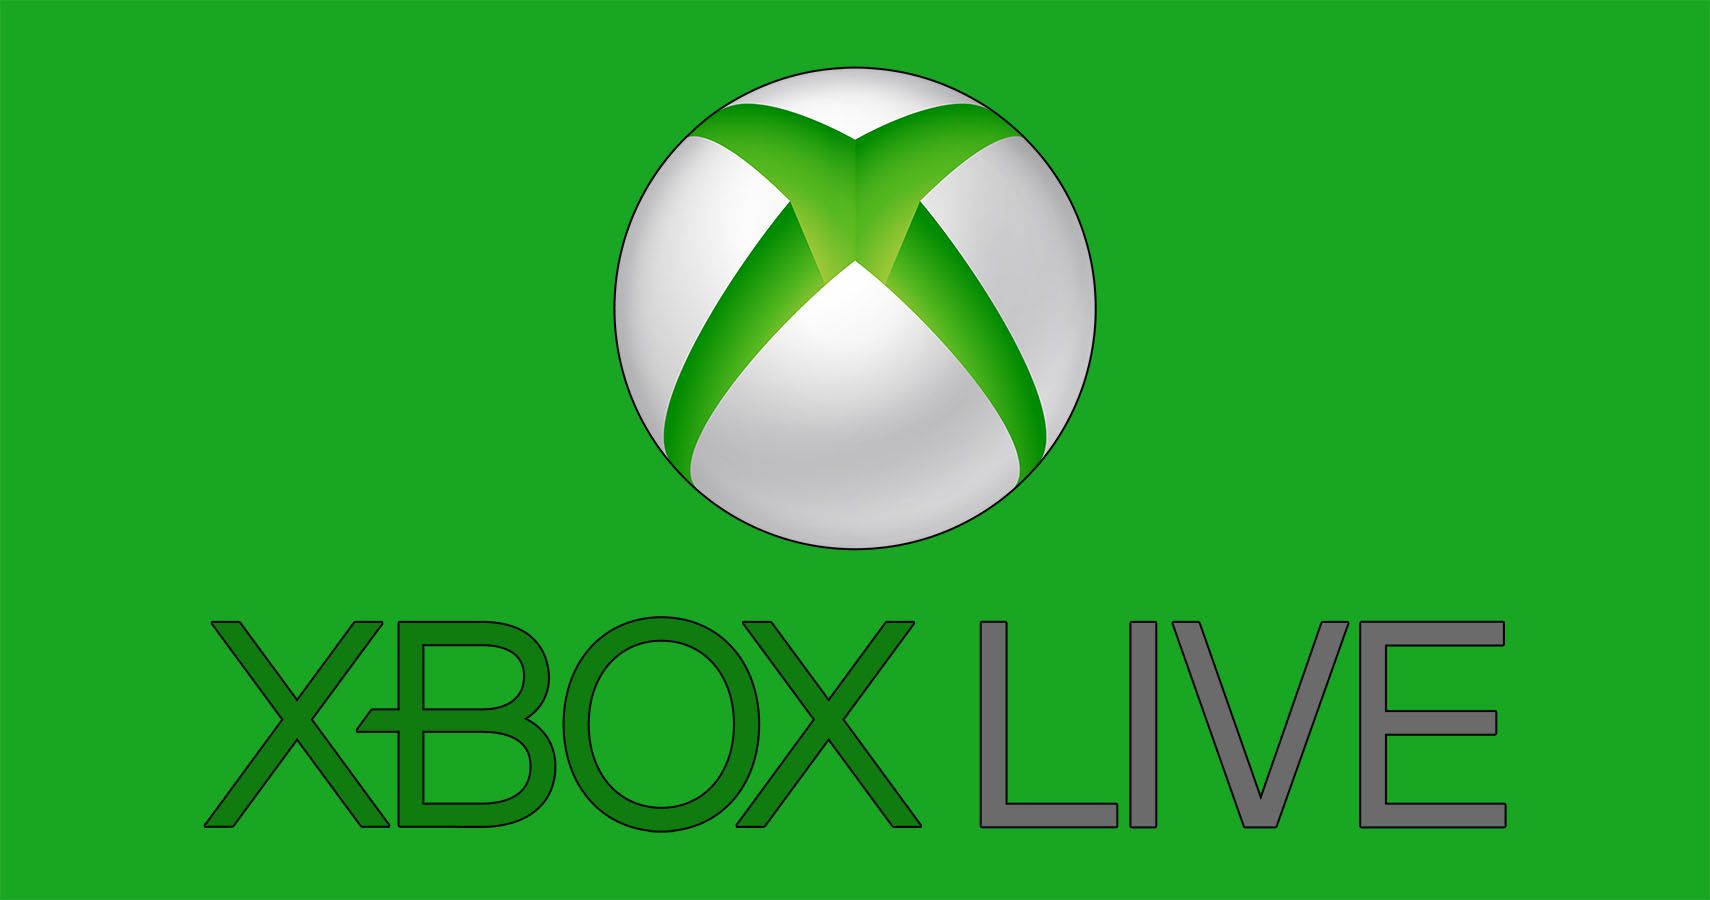 The Xbox Live logo over a green background.